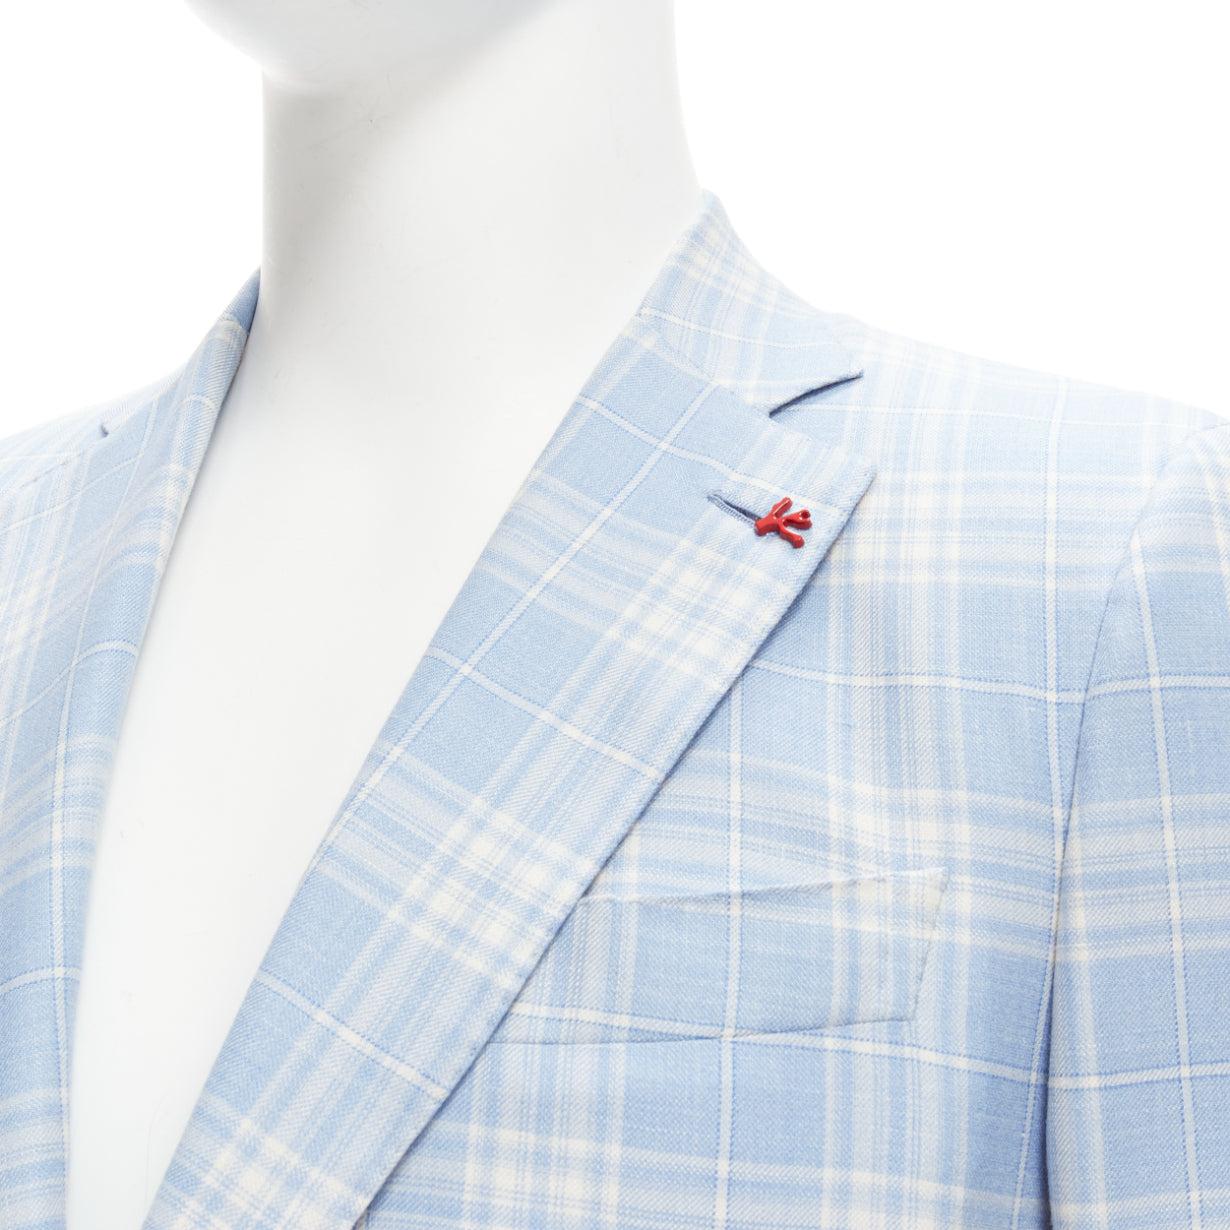 ISAIA Gregory blue check wool cashmere silk linen 2 pocket blazer IT48 M
Reference: JSLE/A00069
Brand: Isaia
Model: Gregory
Material: Wool, Blend
Color: Blue, White
Pattern: Checkered
Closure: Button
Lining: Blue Cupro
Extra Details: Double vent